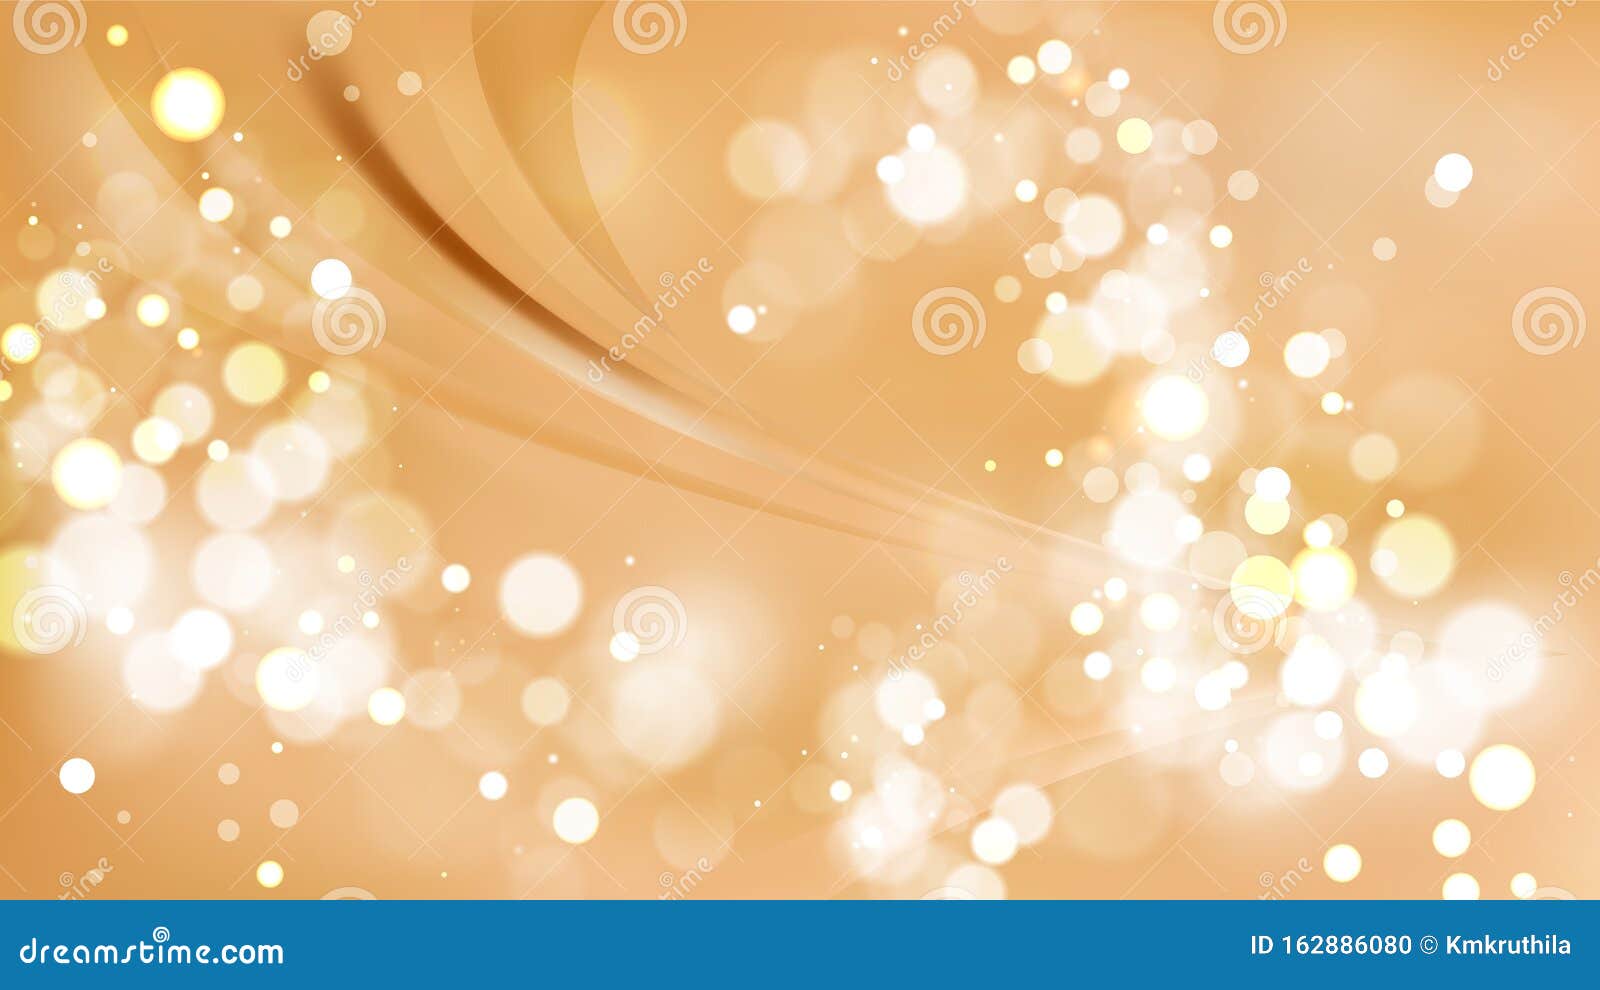 Abstract Light Brown Blur Lights Background Design Stock Vector -  Illustration of background, template: 162886080